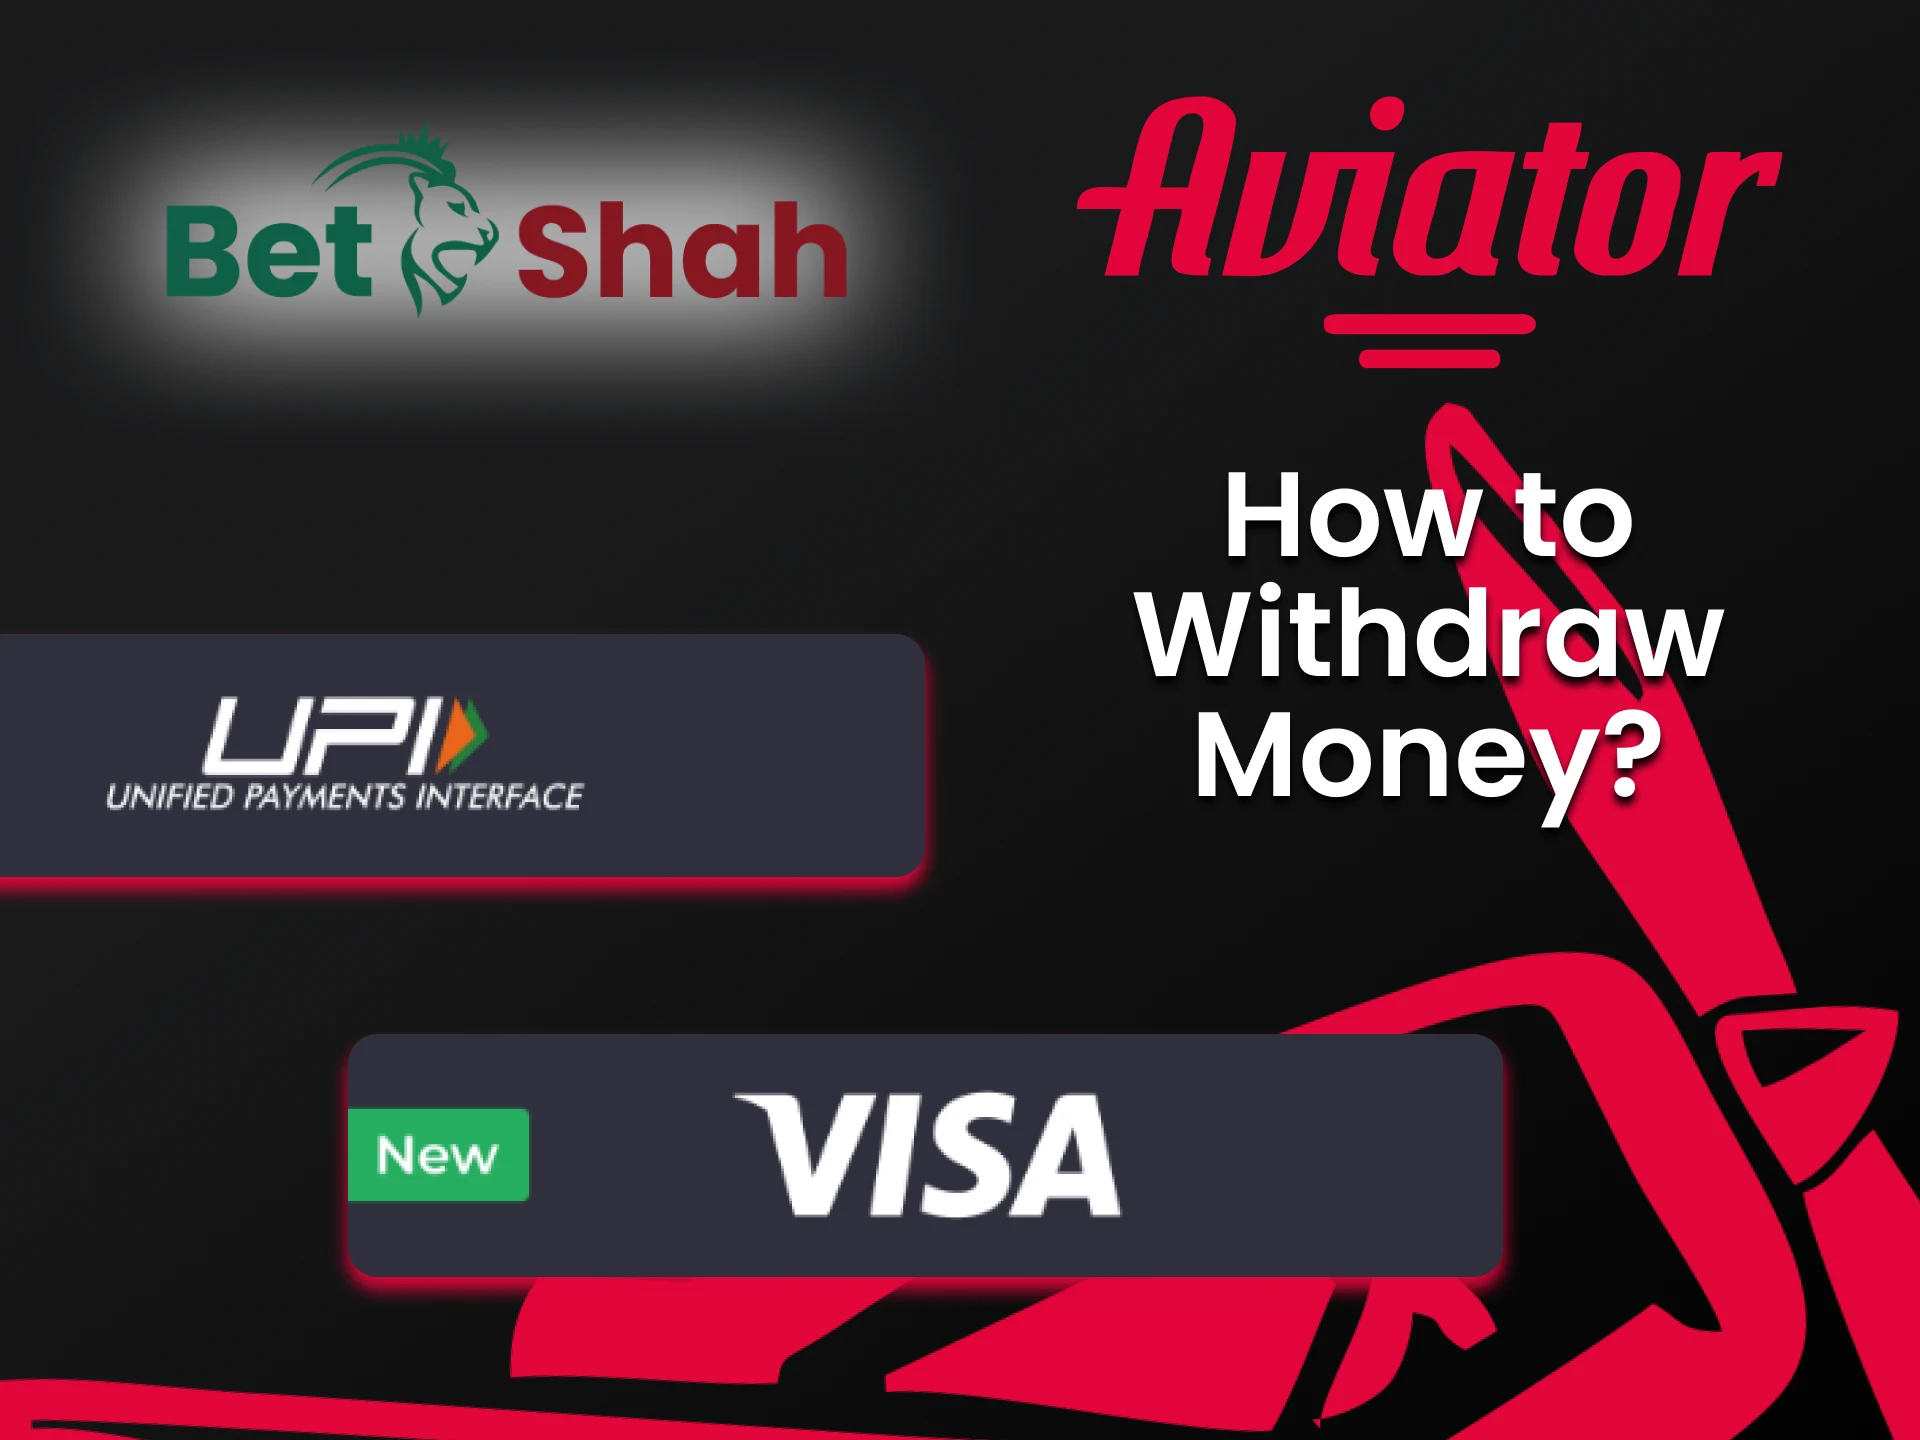 Choose a convenient way to withdraw funds for the Aviator from BetShah.